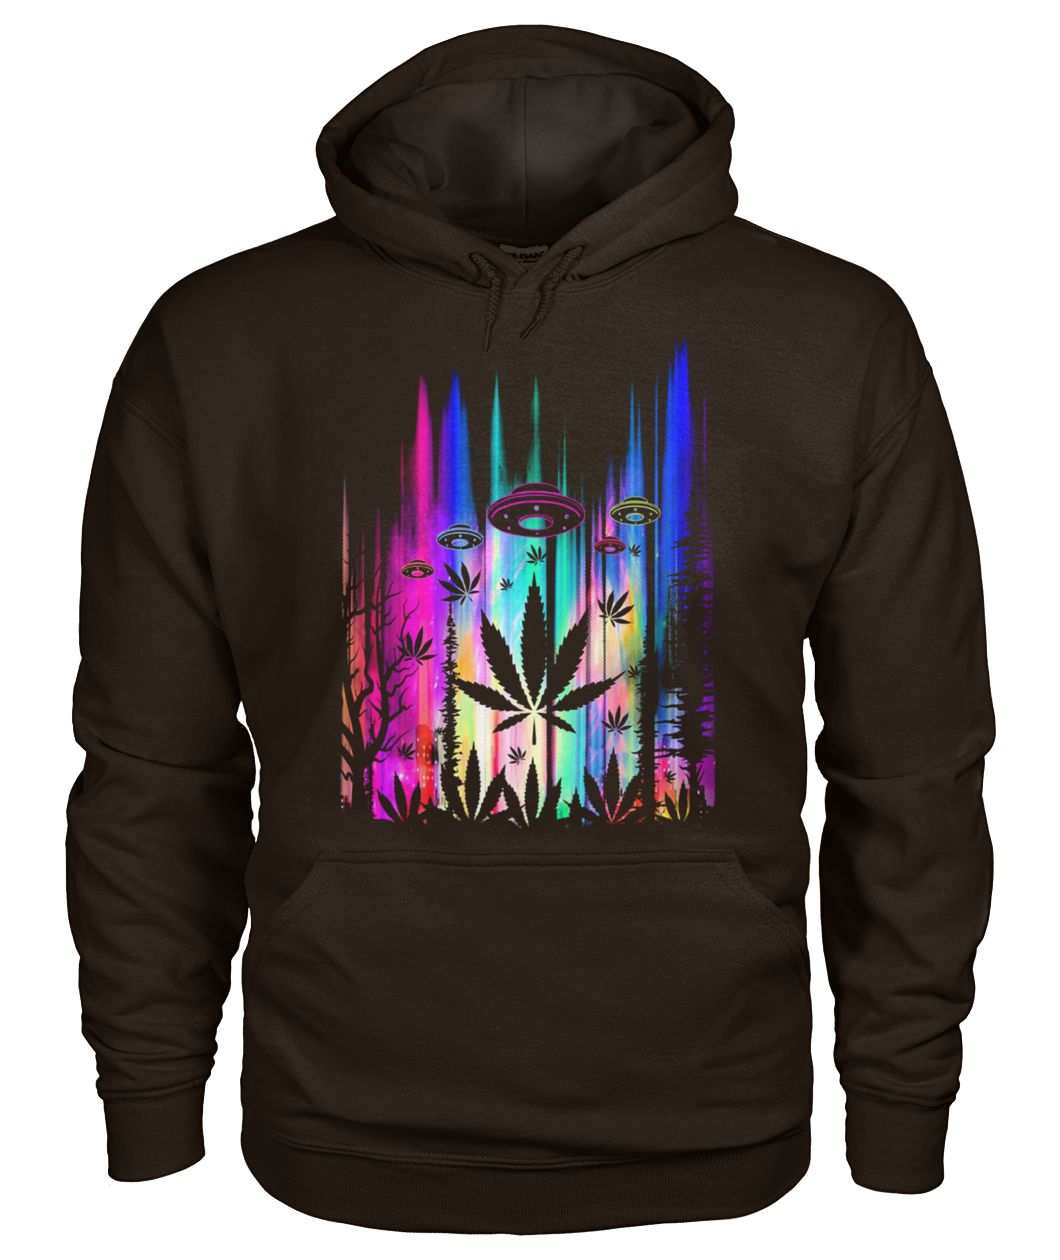 Storm area 51 they can't stop all of us weed gildan hoodie